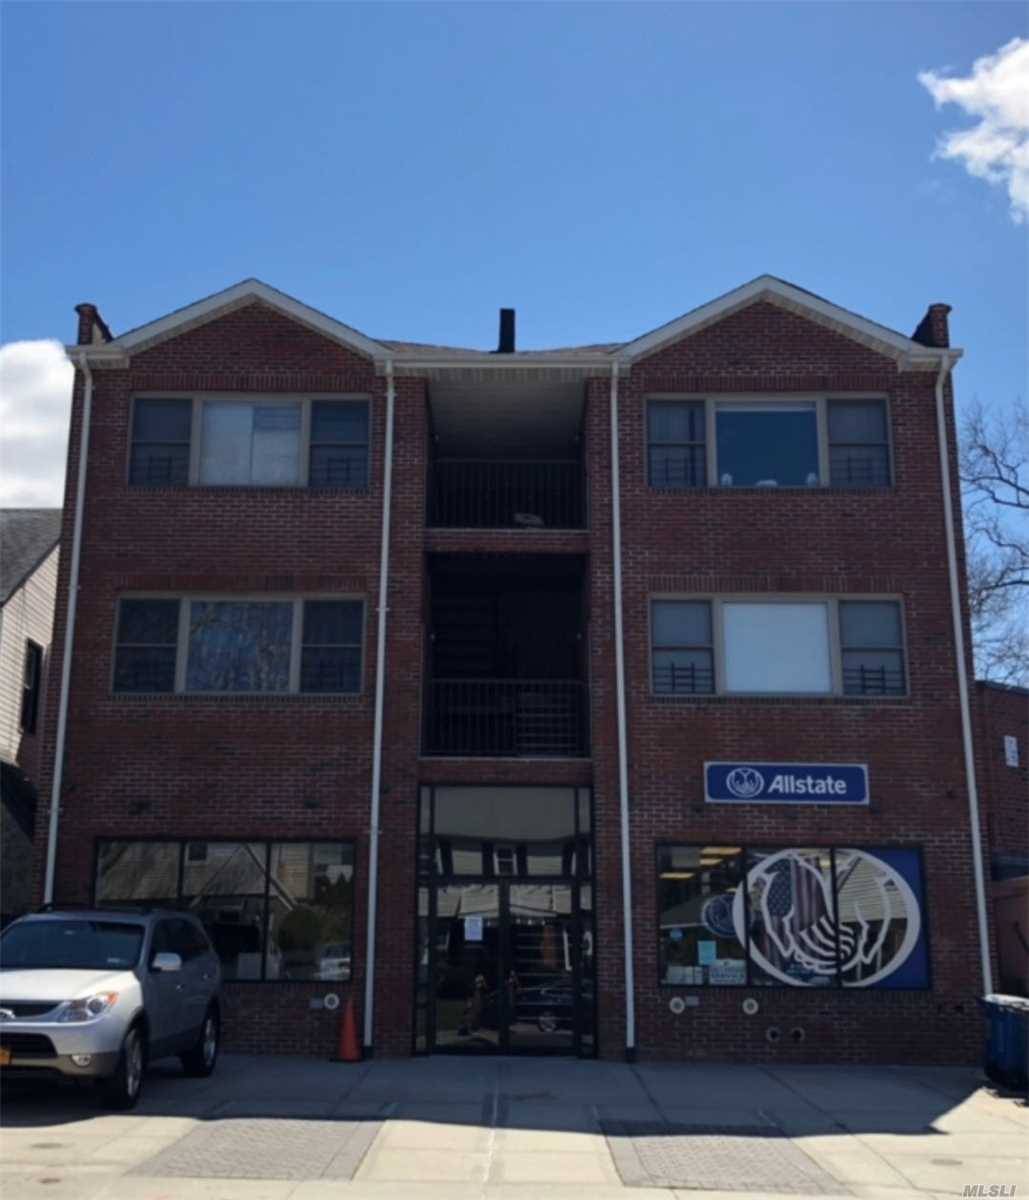 Mixed-Use Building With 2 Commercial And Office Floors & 2-Two Bedrooms Apts.